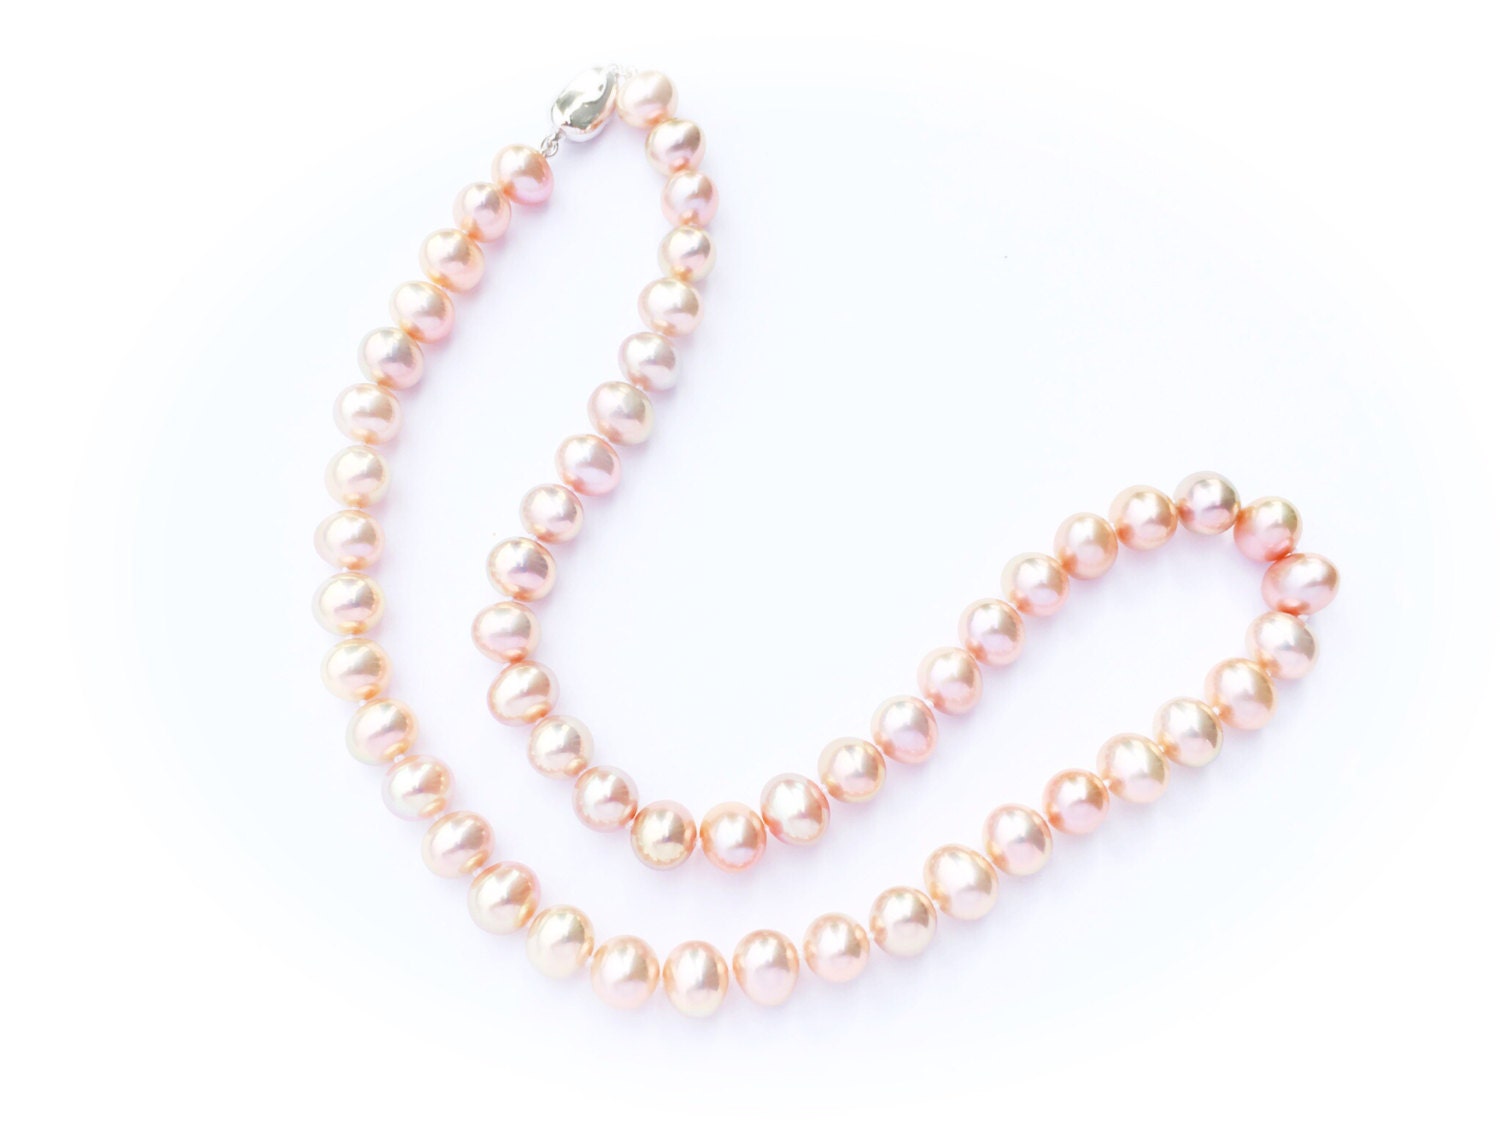 Blush Pink Genuine Cultured Freshwater Pearl by TyleeReiBoutique